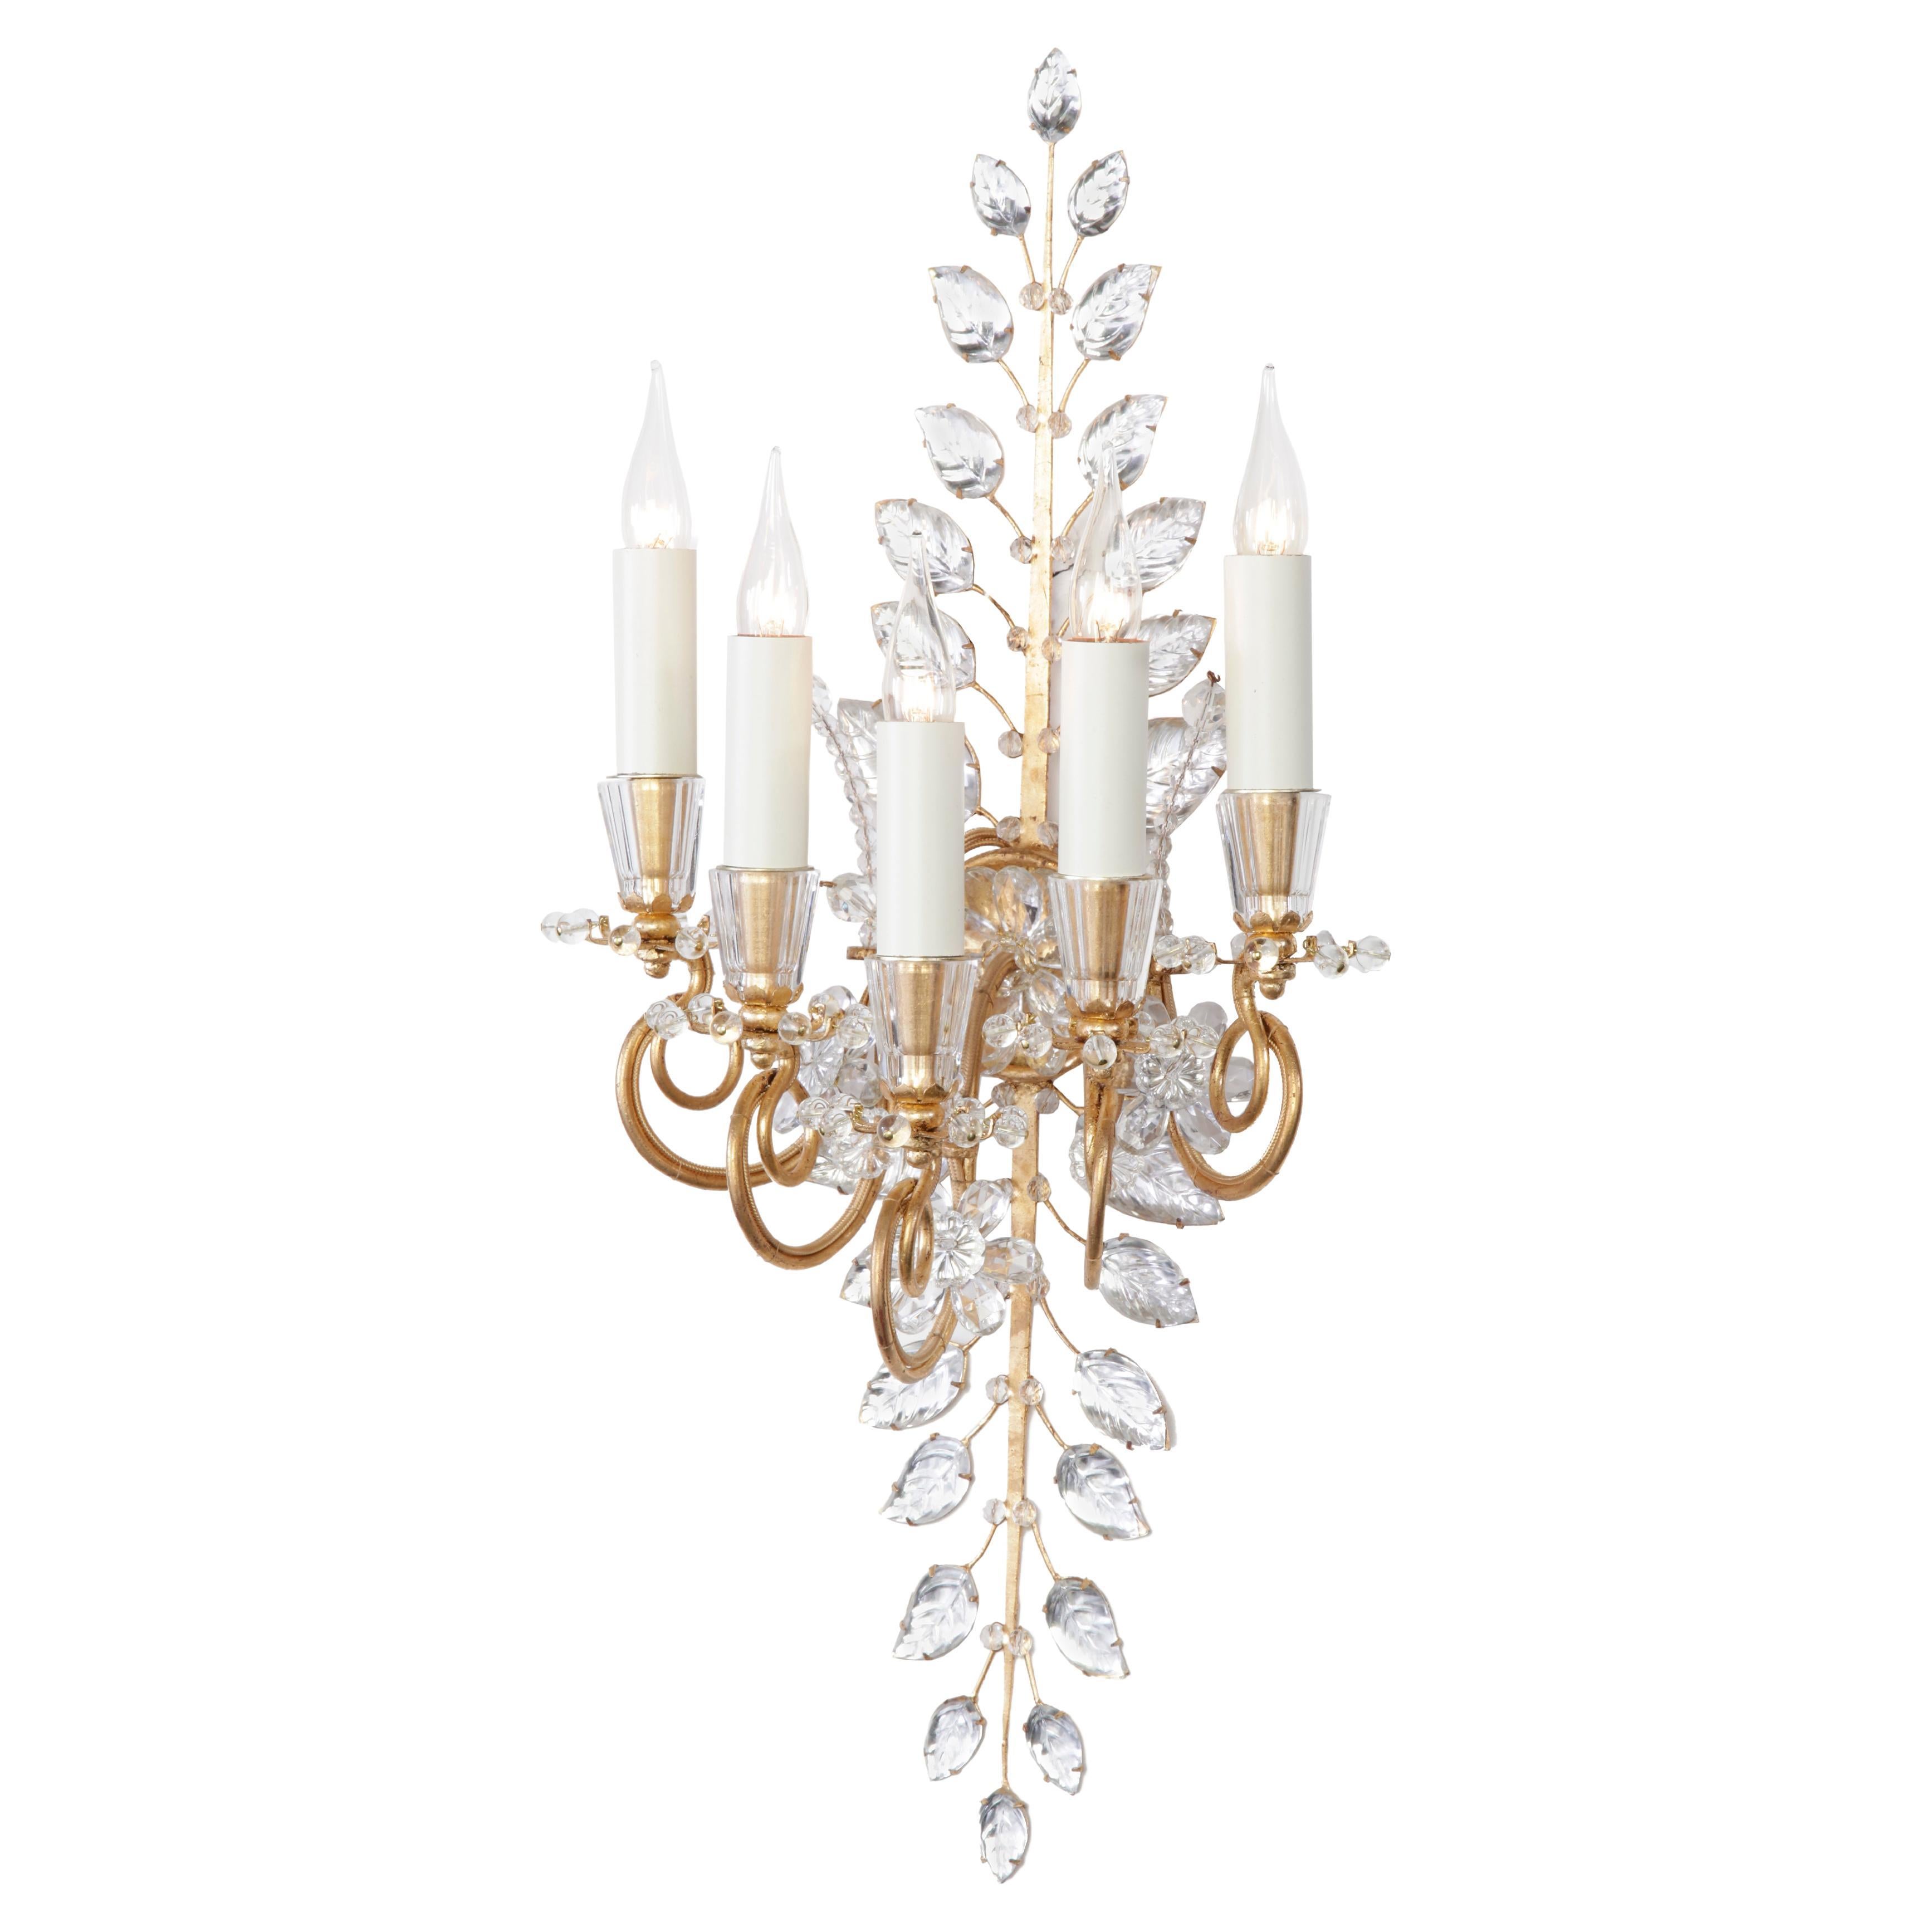 Certified Maison Bagues Sconce, Iron and Crystal 5 Lights #11170 For Sale